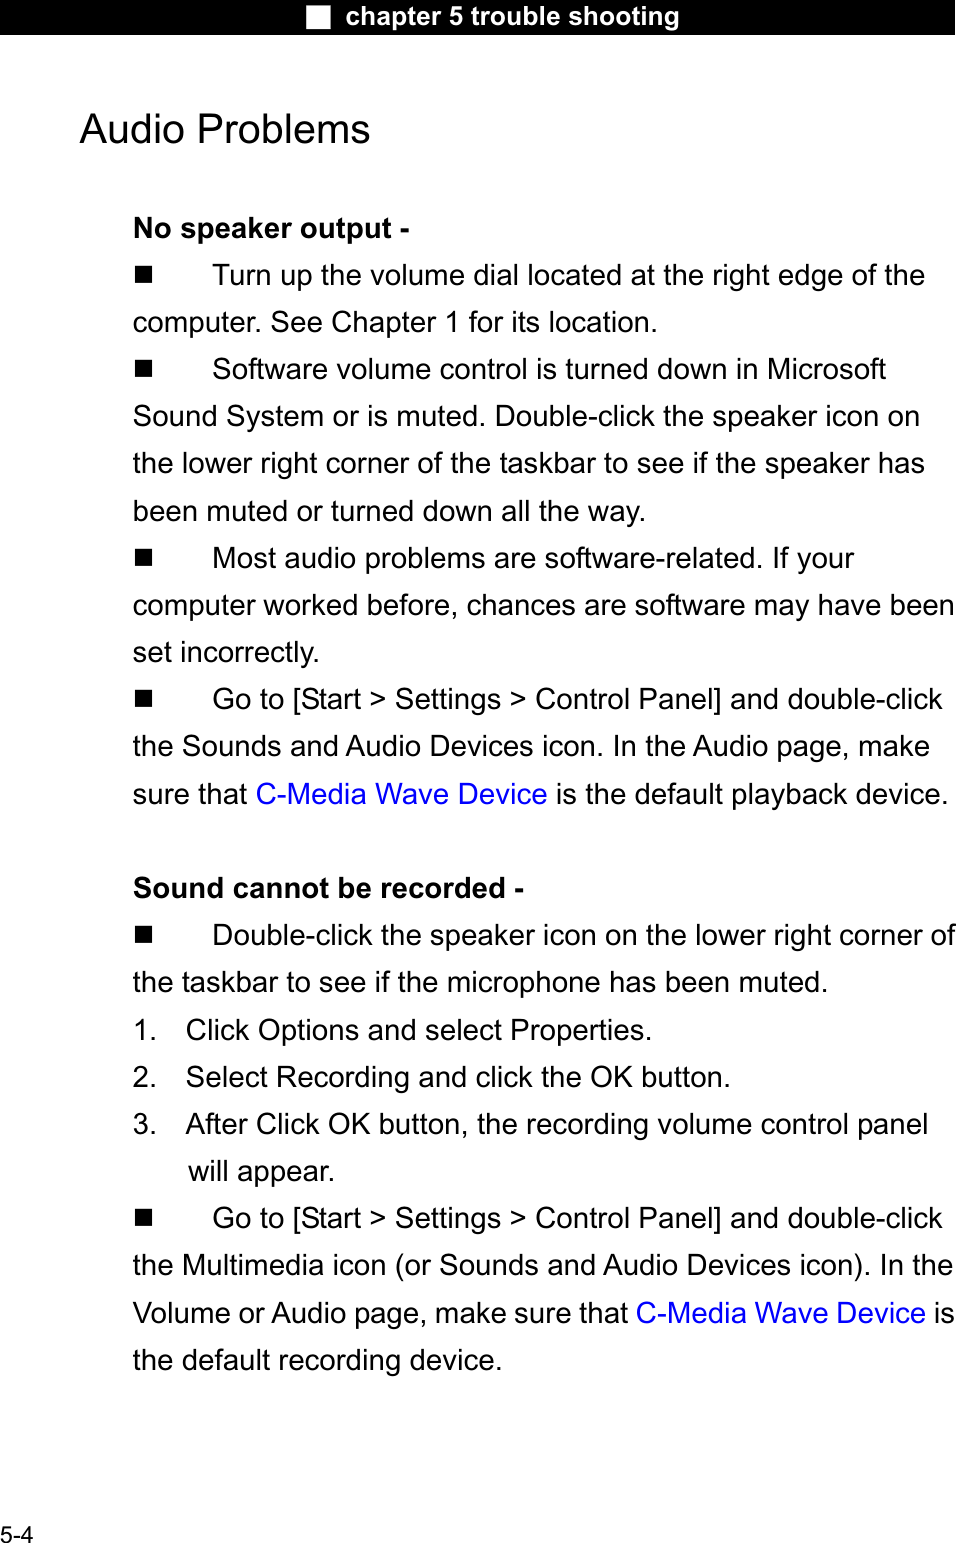 Ϯ chapter 5 trouble shootingAudio Problems No speaker output -  Turn up the volume dial located at the right edge of thecomputer. See Chapter 1 for its location. Software volume control is turned down in MicrosoftSound System or is muted. Double-click the speaker icon onthe lower right corner of the taskbar to see if the speaker hasbeen muted or turned down all the way. Most audio problems are software-related. If yourcomputer worked before, chances are software may have beenset incorrectly. Go to [Start &gt; Settings &gt; Control Panel] and double-clickthe Sounds and Audio Devices icon. In the Audio page, make sure that C-Media Wave Device is the default playback device.Sound cannot be recorded - Double-click the speaker icon on the lower right corner of the taskbar to see if the microphone has been muted.1. Click Options and select Properties.2. Select Recording and click the OK button. 3. After Click OK button, the recording volume control panelwill appear. Go to [Start &gt; Settings &gt; Control Panel] and double-clickthe Multimedia icon (or Sounds and Audio Devices icon). In the Volume or Audio page, make sure that C-Media Wave Device is the default recording device.5-4